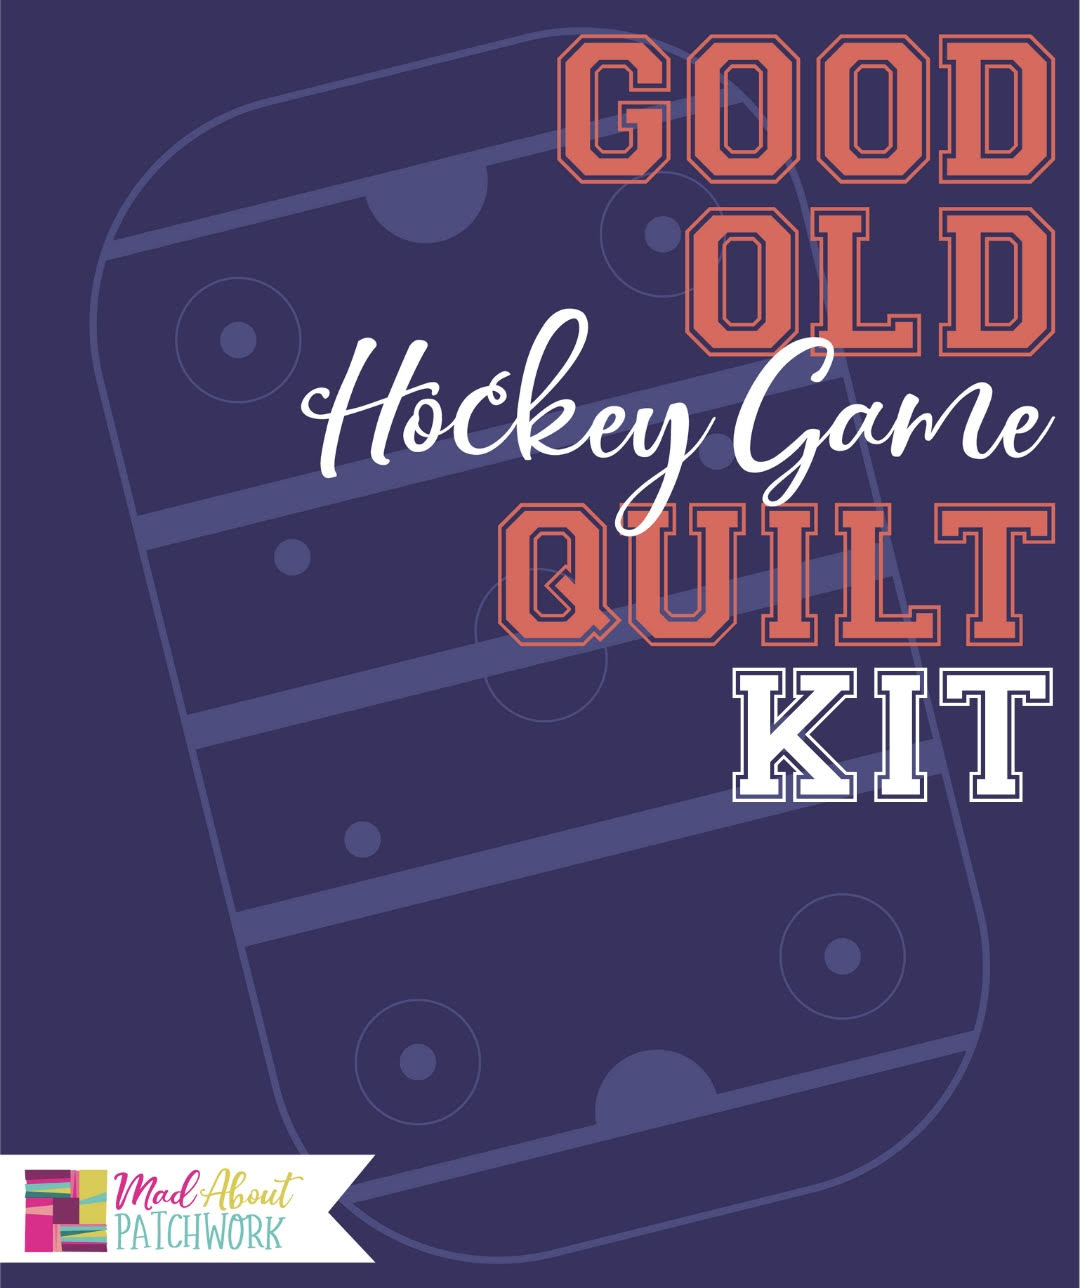 Good Old Hockey Game - Quilt Kit (pattern not included)